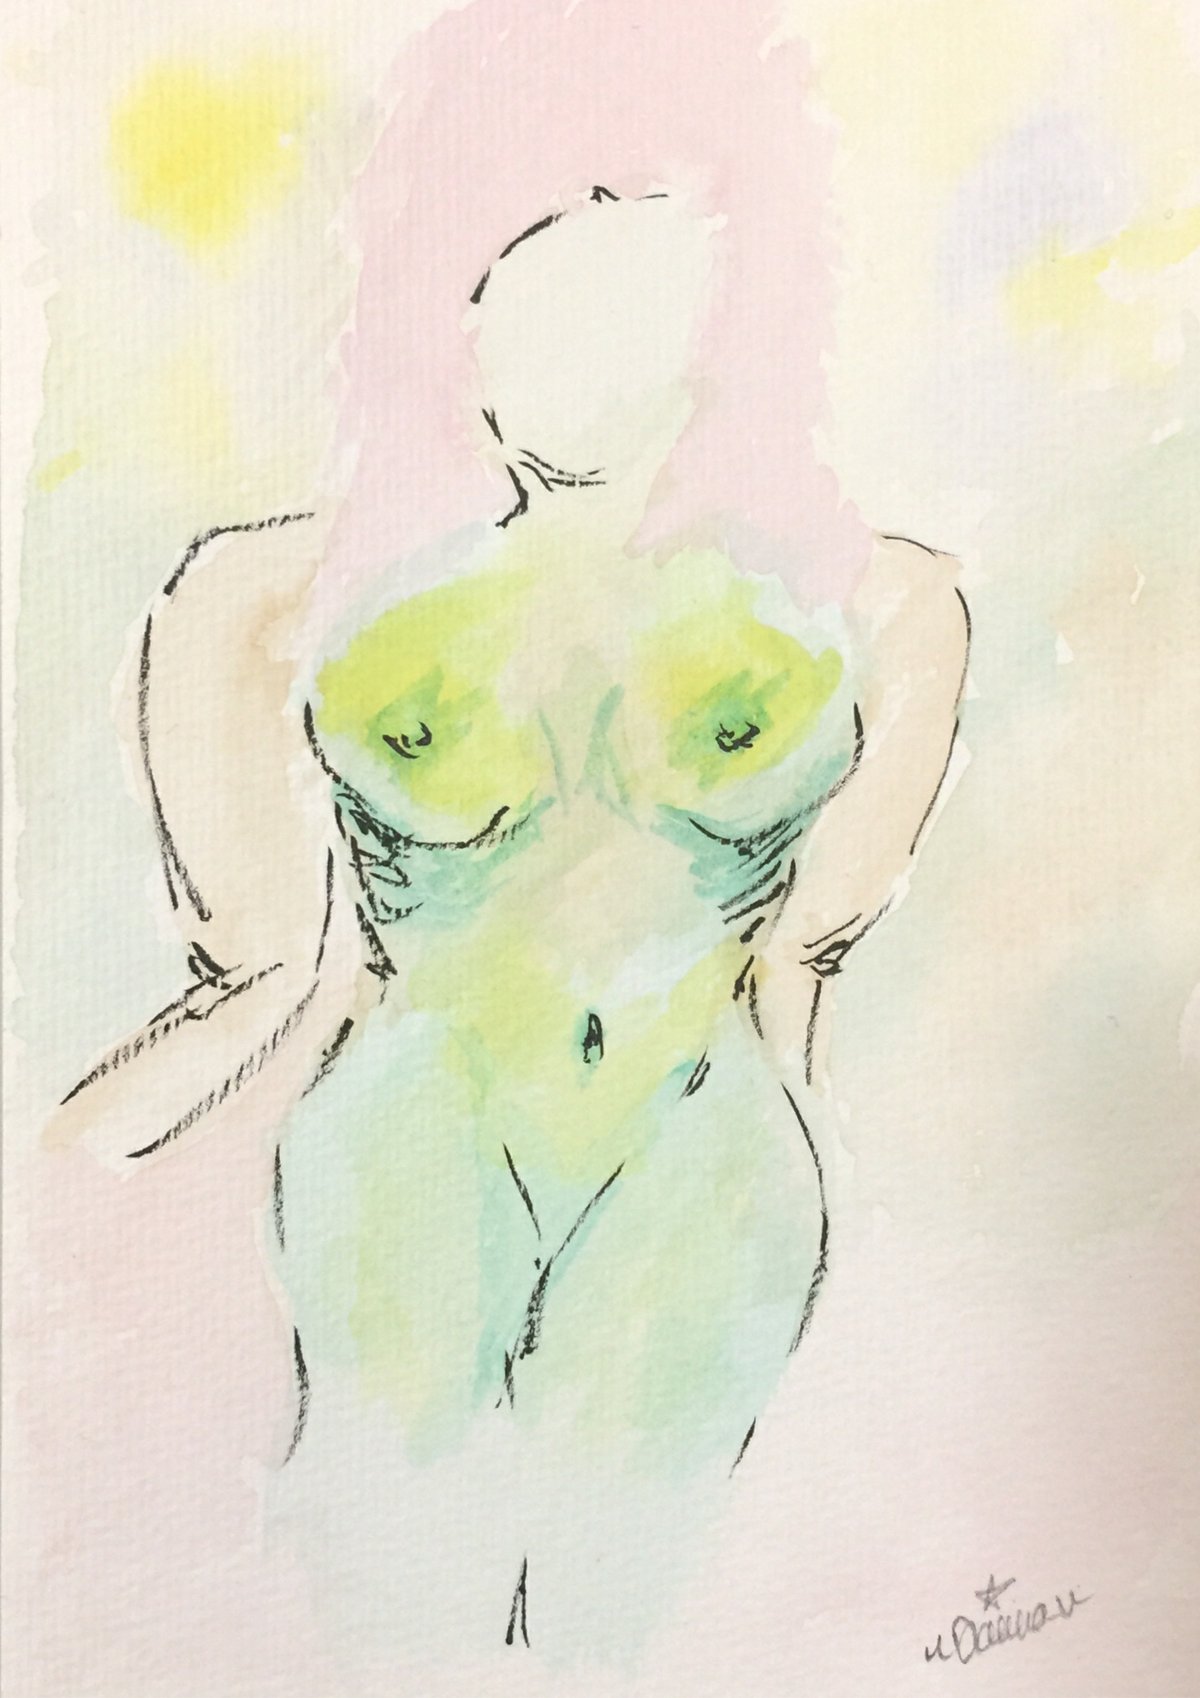 Image of "Abstract Nude in Pastel Watercolours", Original Ink and Watercolour, A5 (148 x 210 mm)